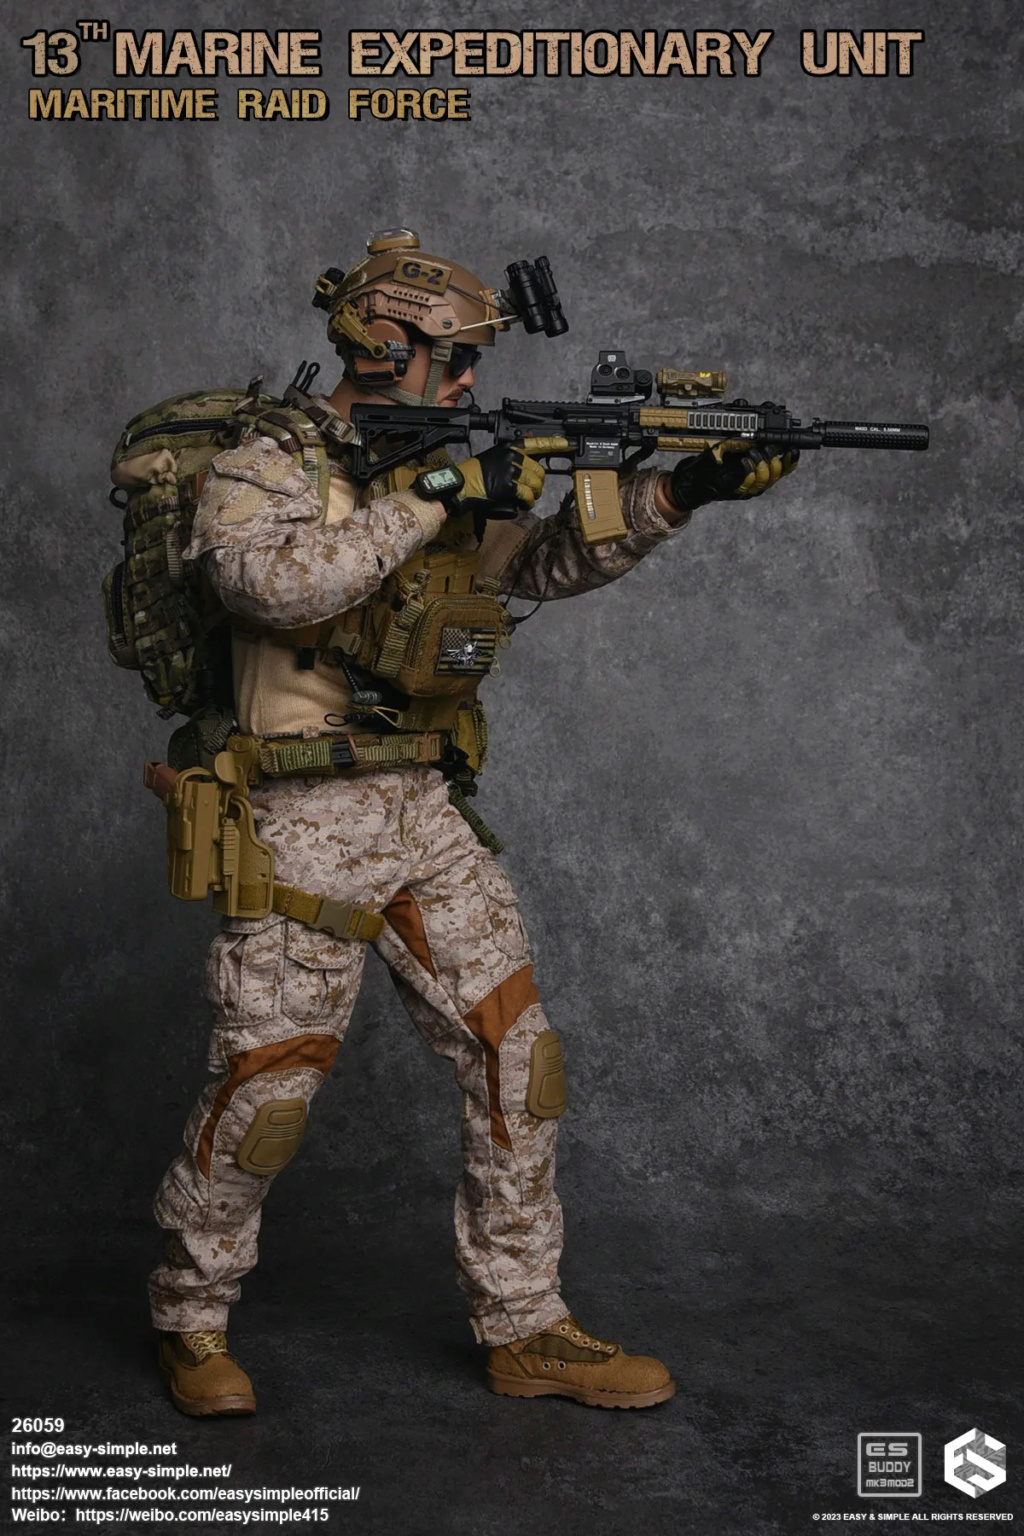 newproduct - NEW PRODUCT: Easy&Simple: 26059 13th Marine Expeditionary Unit Maritime Raid Force F53a4b10